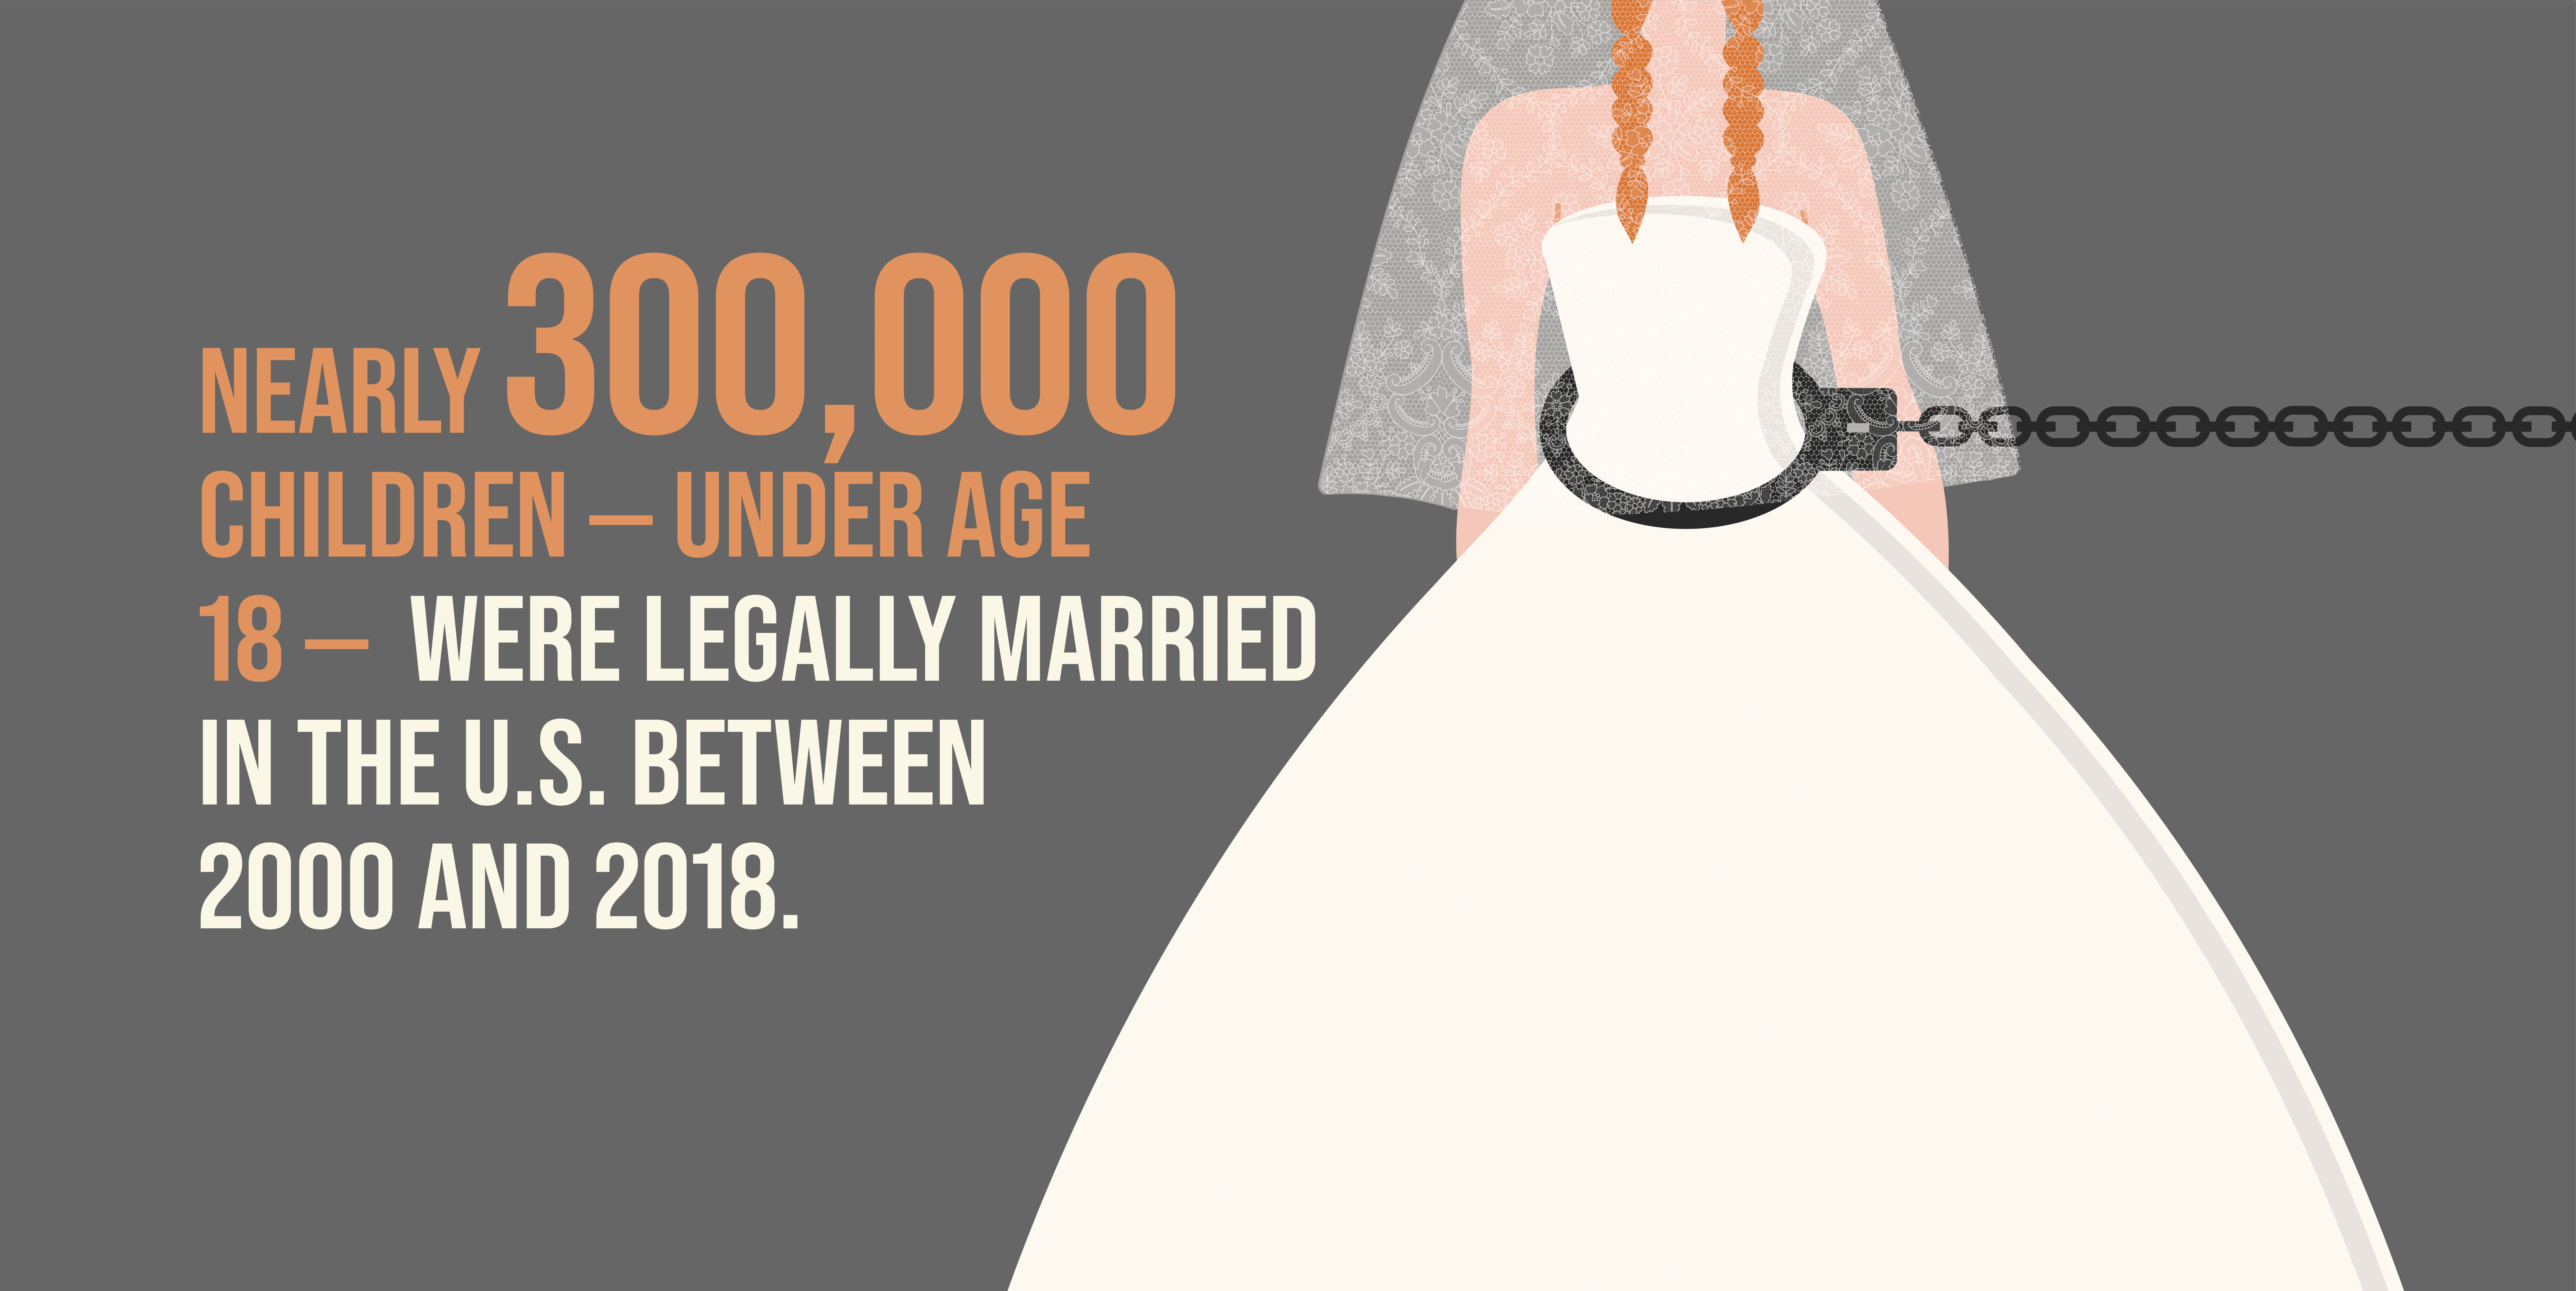 About Child Marriage in the U.S. image